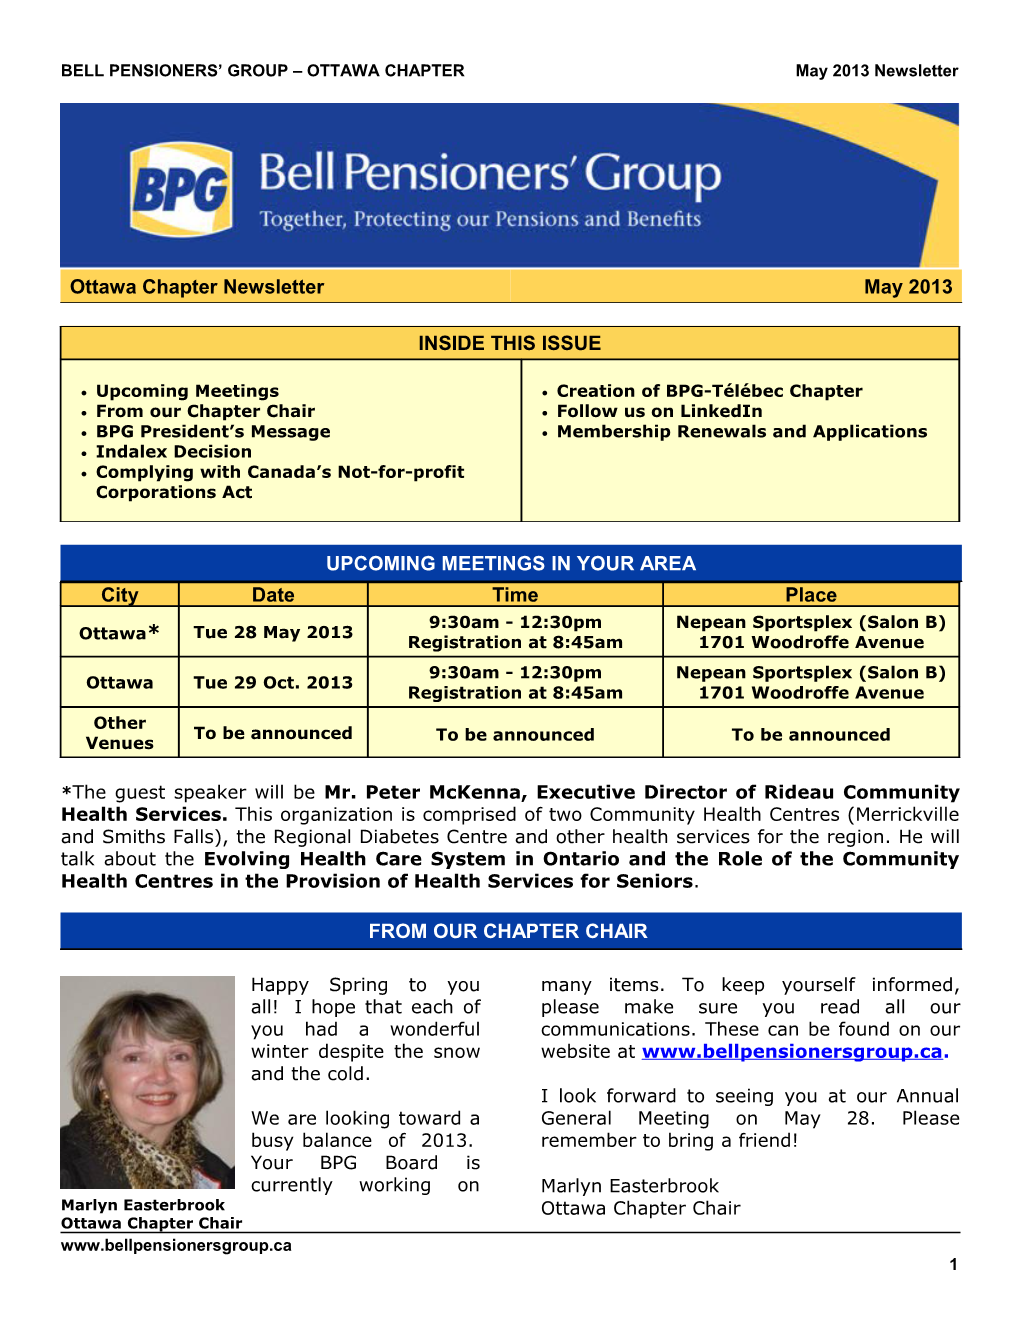 BELL PENSIONERS GROUP OTTAWA Chaptermay 2013 Newsletter